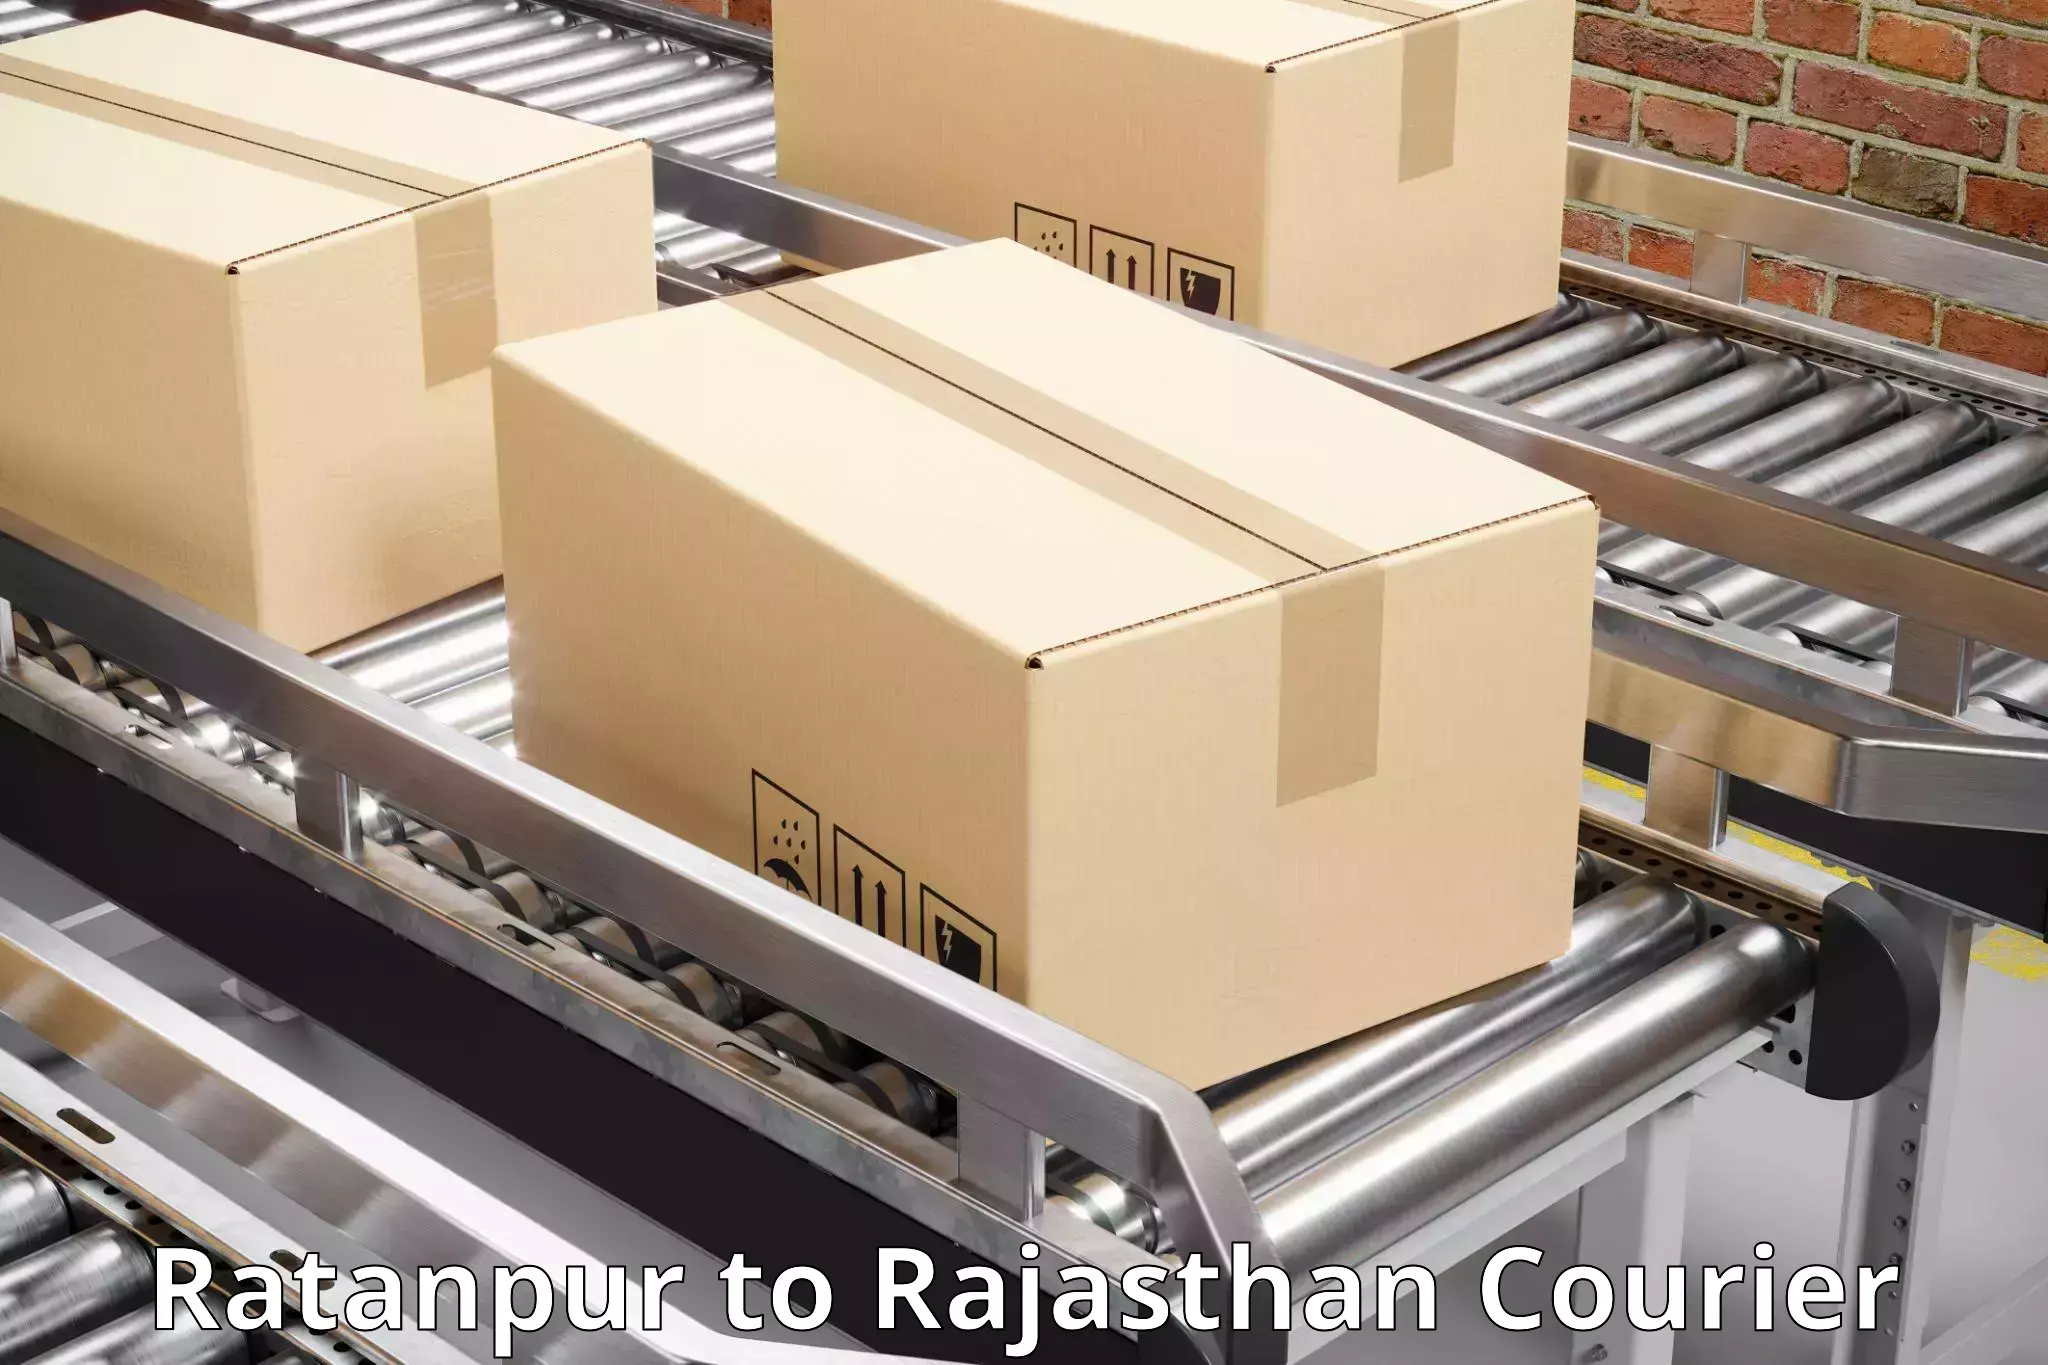 Flexible parcel services Ratanpur to Mathania